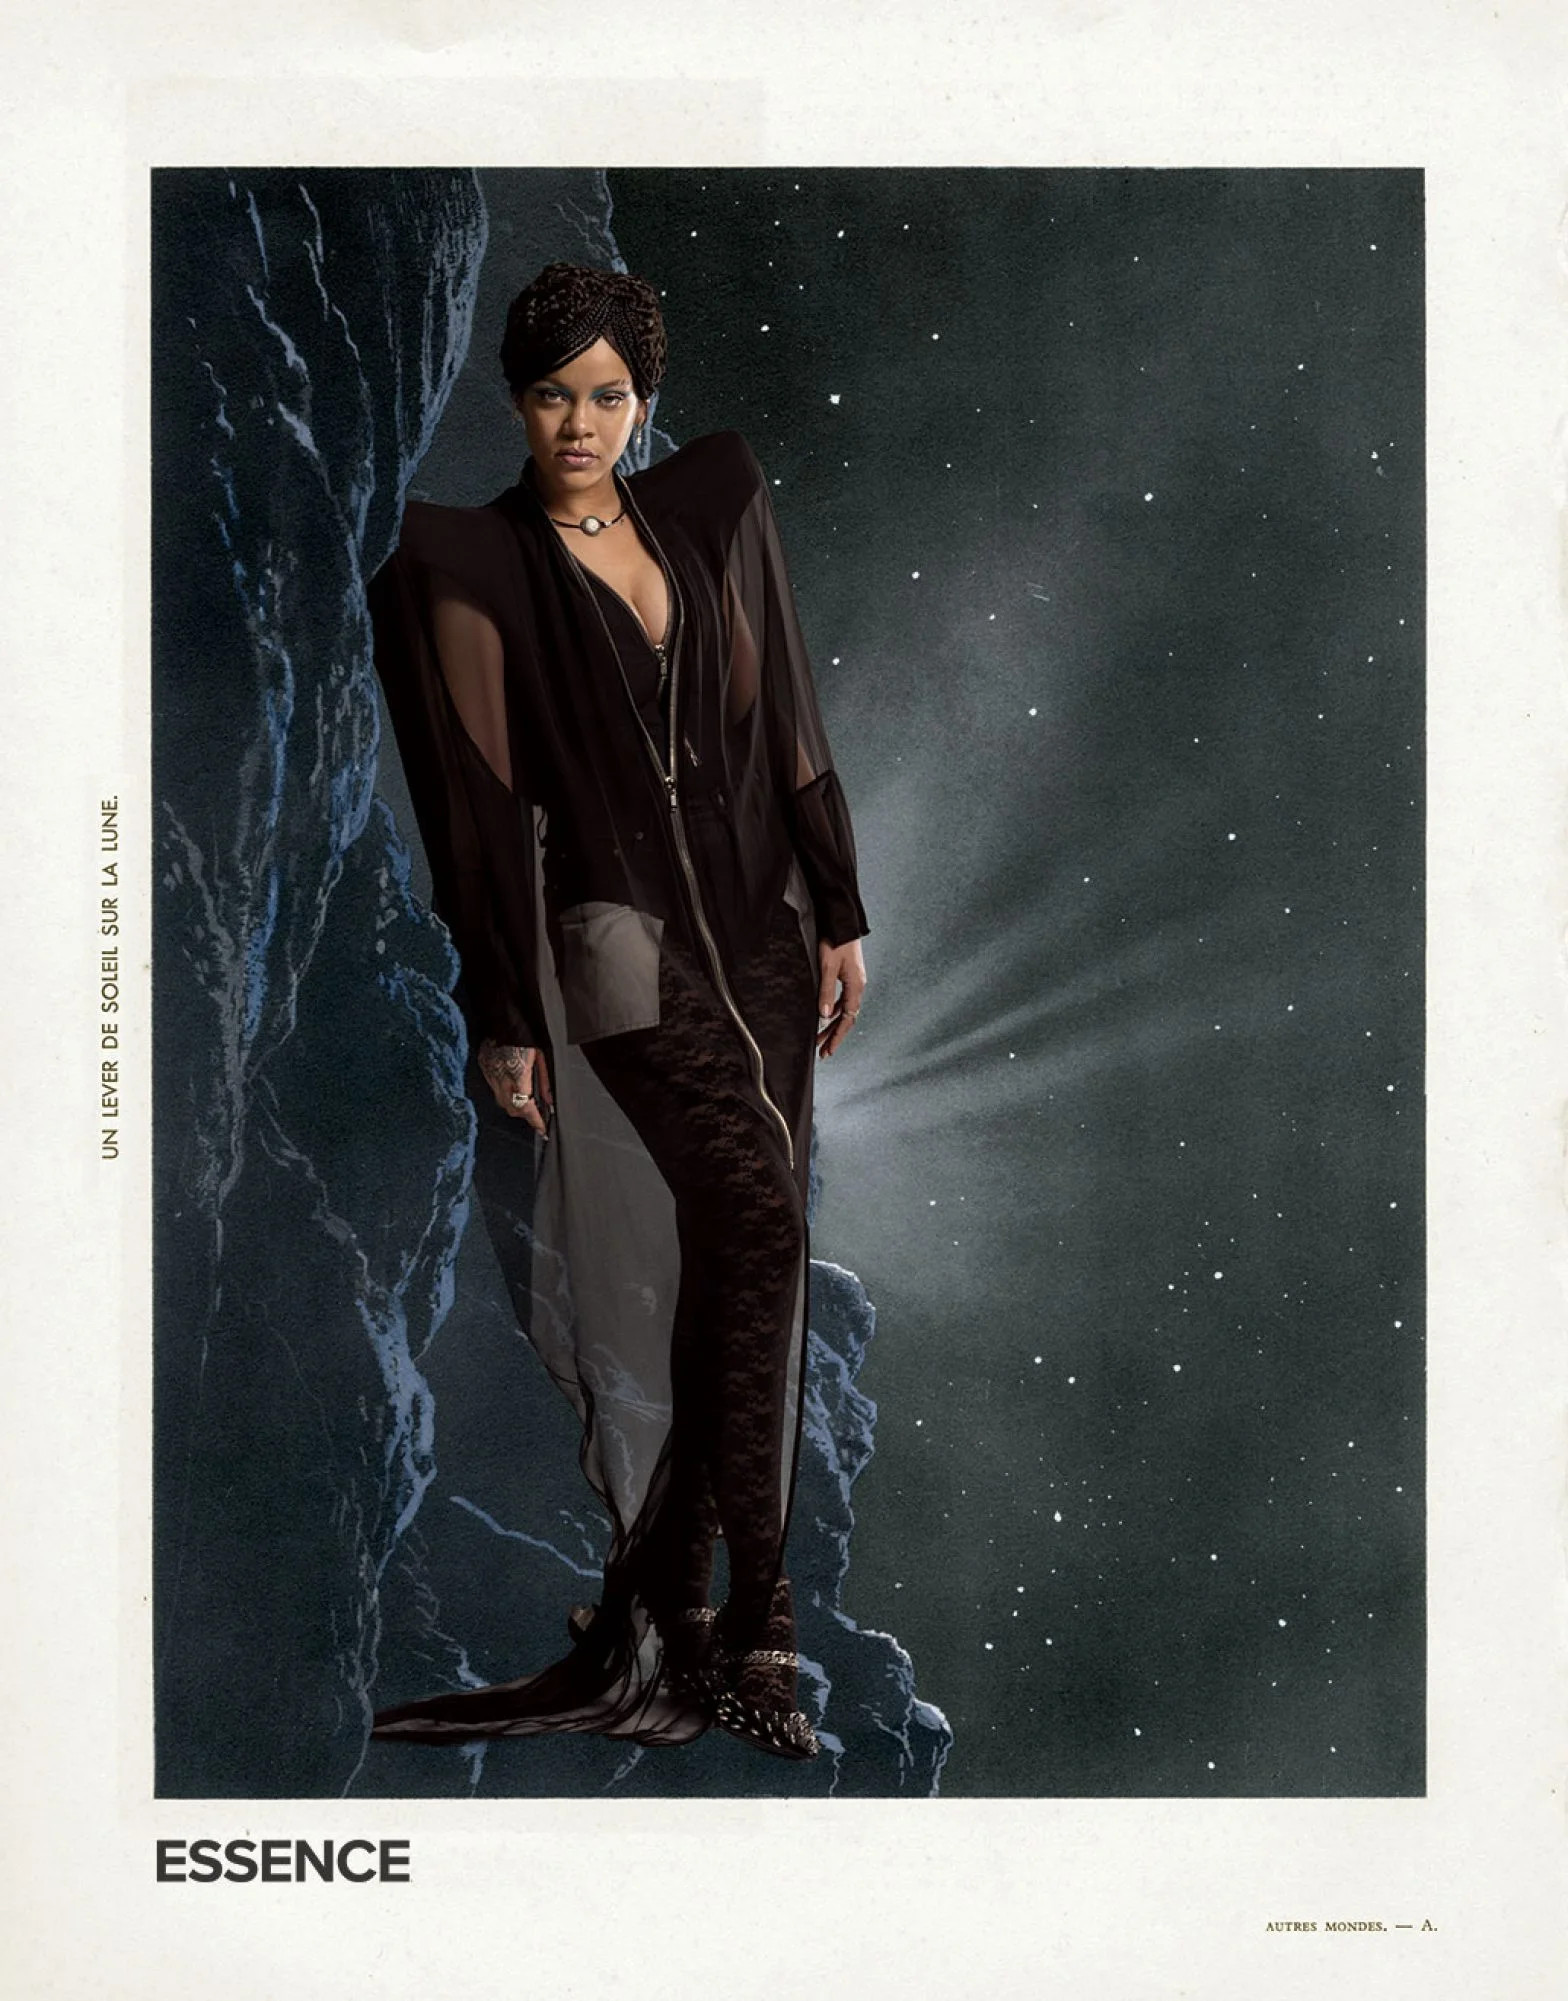 Moving Planets Rihanna by Lorna Simpson, of Earth & Sky, 2020. Photographic Collage, Dimensions Variable © Lorna Simpson Courtesy of the Artist and Hauser & Wirth. Coat, jacket and shorts Rick Owens. Leggings Savage X Fenty. Shoes Givenchy. Choker Belperron. Rings Belperron and Messika. Earrings Chrome Hearts, Thelma West (Drops), Messika and Melissa Kaye (Cuff Stud). Anklet Rihanna’s own.